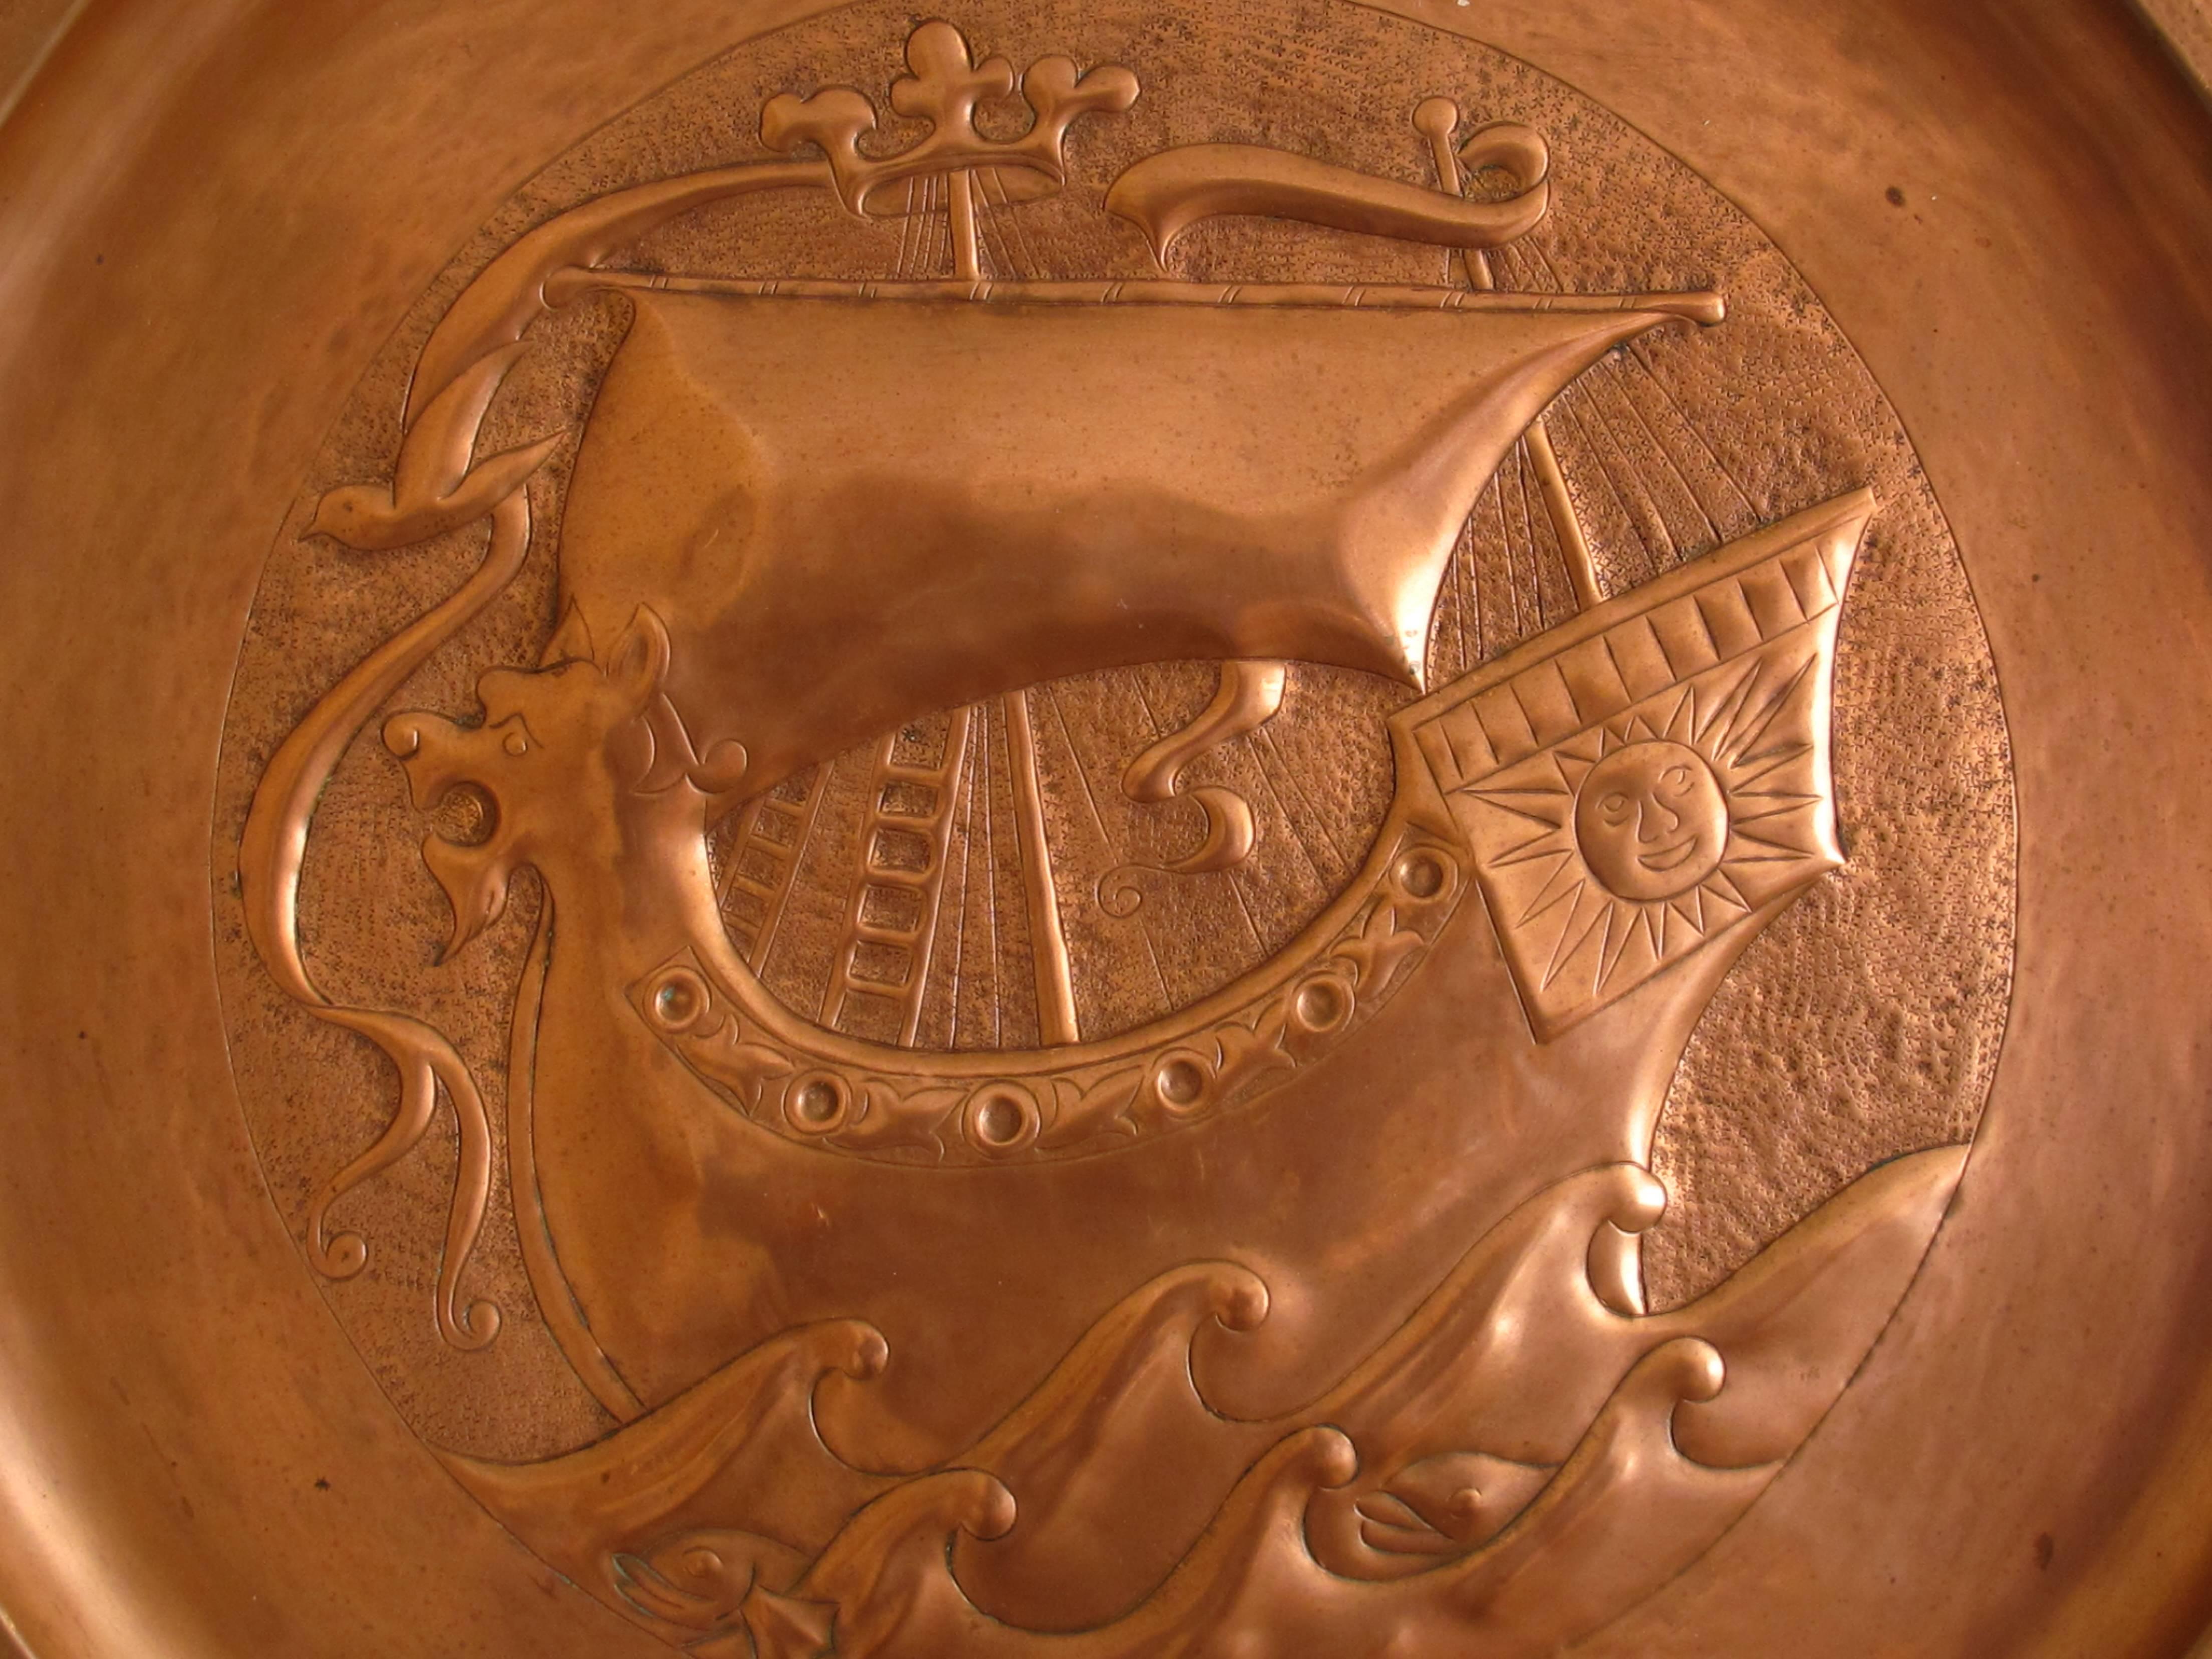 Keswick School of Industrial Arts – A superb Arts & Crafts copper charger. Approximate diameter 57 cm. Marked to front KSIA. English, circa 1900. Excellent original condition and a fine example of this work. The KSIA was established in the Lake